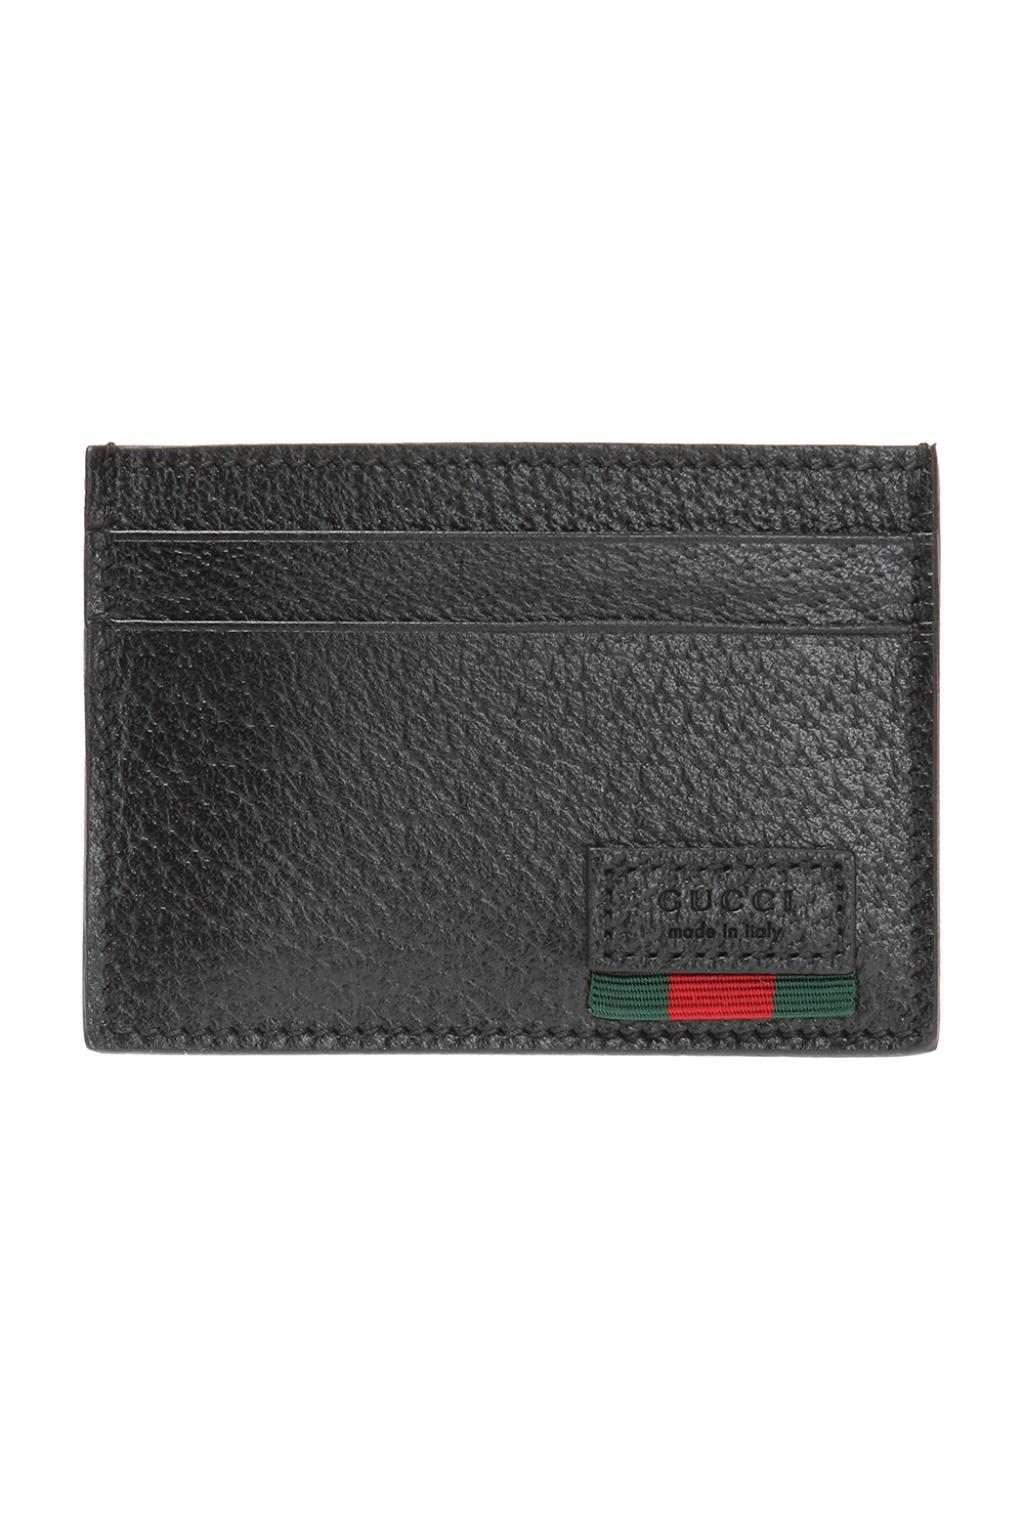 gucci card holder with clip